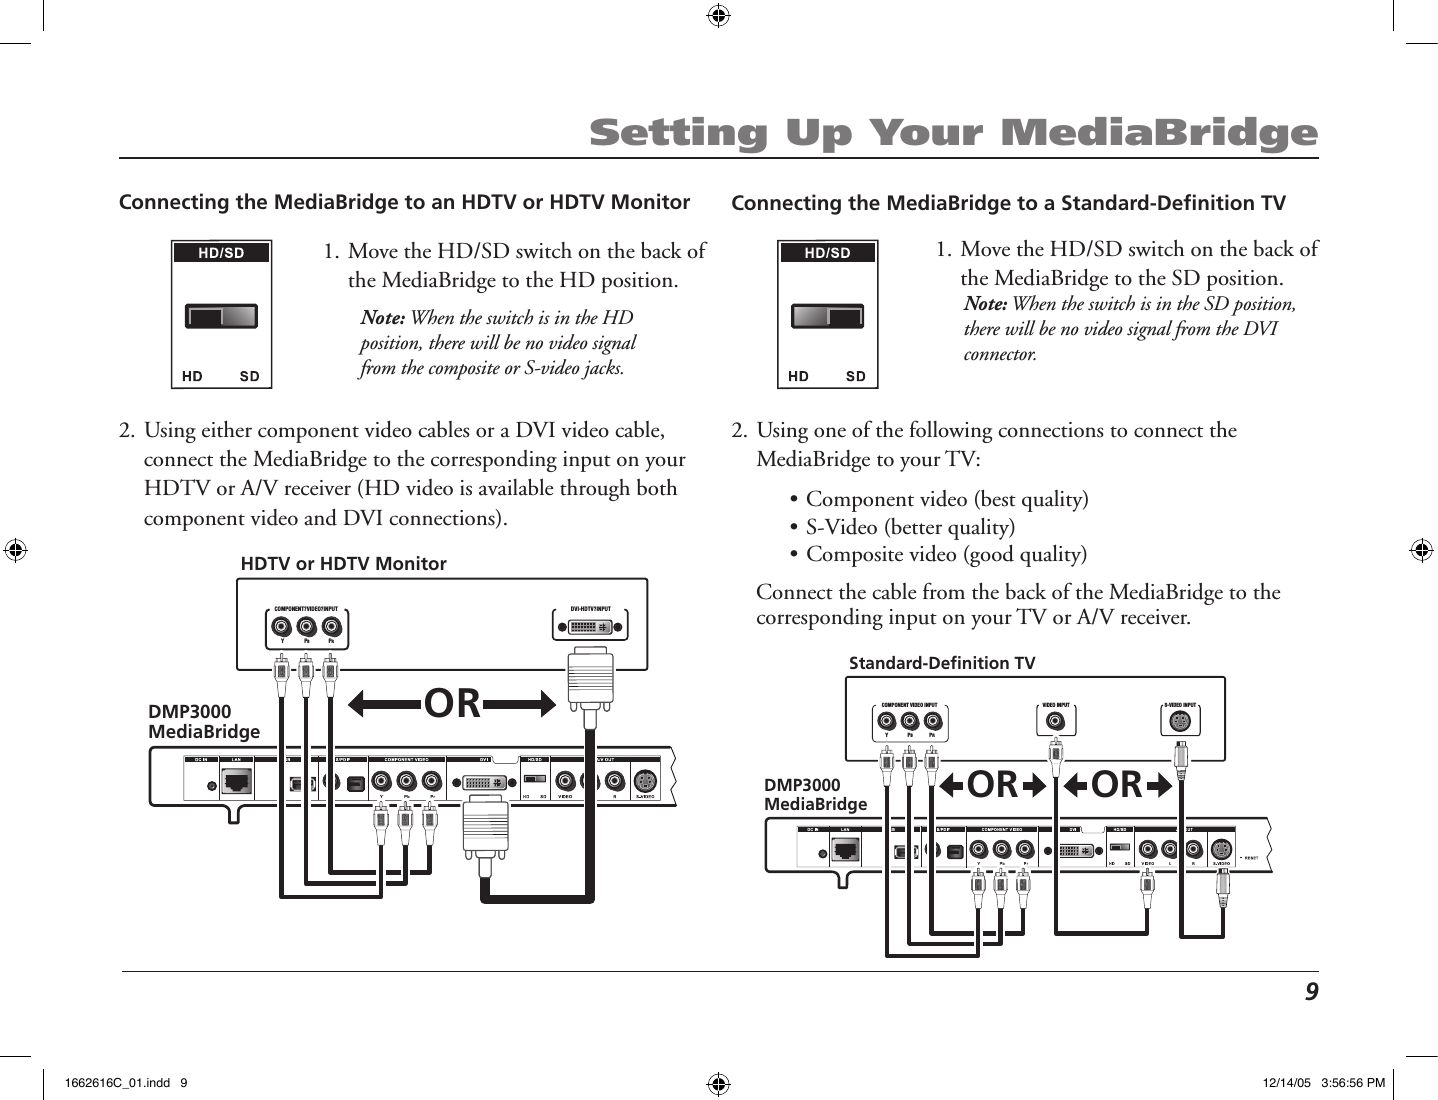  9Setting Up Your MediaBridgeConnecting the MediaBridge to an HDTV or HDTV Monitor1. Move the HD/SD switch on the back of the MediaBridge to the HD position.Note: When the switch is in the HD position, there will be no video signal from the composite or S-video jacks.2. Using either component video cables or a DVI video cable, connect the MediaBridge to the corresponding input on your HDTV or A/V receiver (HD video is available through both component video and DVI connections).   DMP3000 MediaBridgeDVI-HDTV?INPUTCOMPONENT?VIDEO?INPUTHDTV or HDTV MonitorY PBPRORConnecting the MediaBridge to a Standard-Deﬁnition TV1. Move the HD/SD switch on the back of the MediaBridge to the SD position. Note: When the switch is in the SD position, there will be no video signal from the DVI connector. 2. Using one of the following connections to connect the MediaBridge to your TV:  • Component video (best quality)   • S-Video (better quality) • Composite video (good quality)  Connect the cable from the back of the MediaBridge to the corresponding input on your TV or A/V receiver.DMP3000 MediaBridgeY               PB                PRCOMPONENT VIDEO INPUT VIDEO INPUT S-VIDEO INPUTStandard-Definition TVOR OR1662616C_01.indd   9 12/14/05   3:56:56 PM